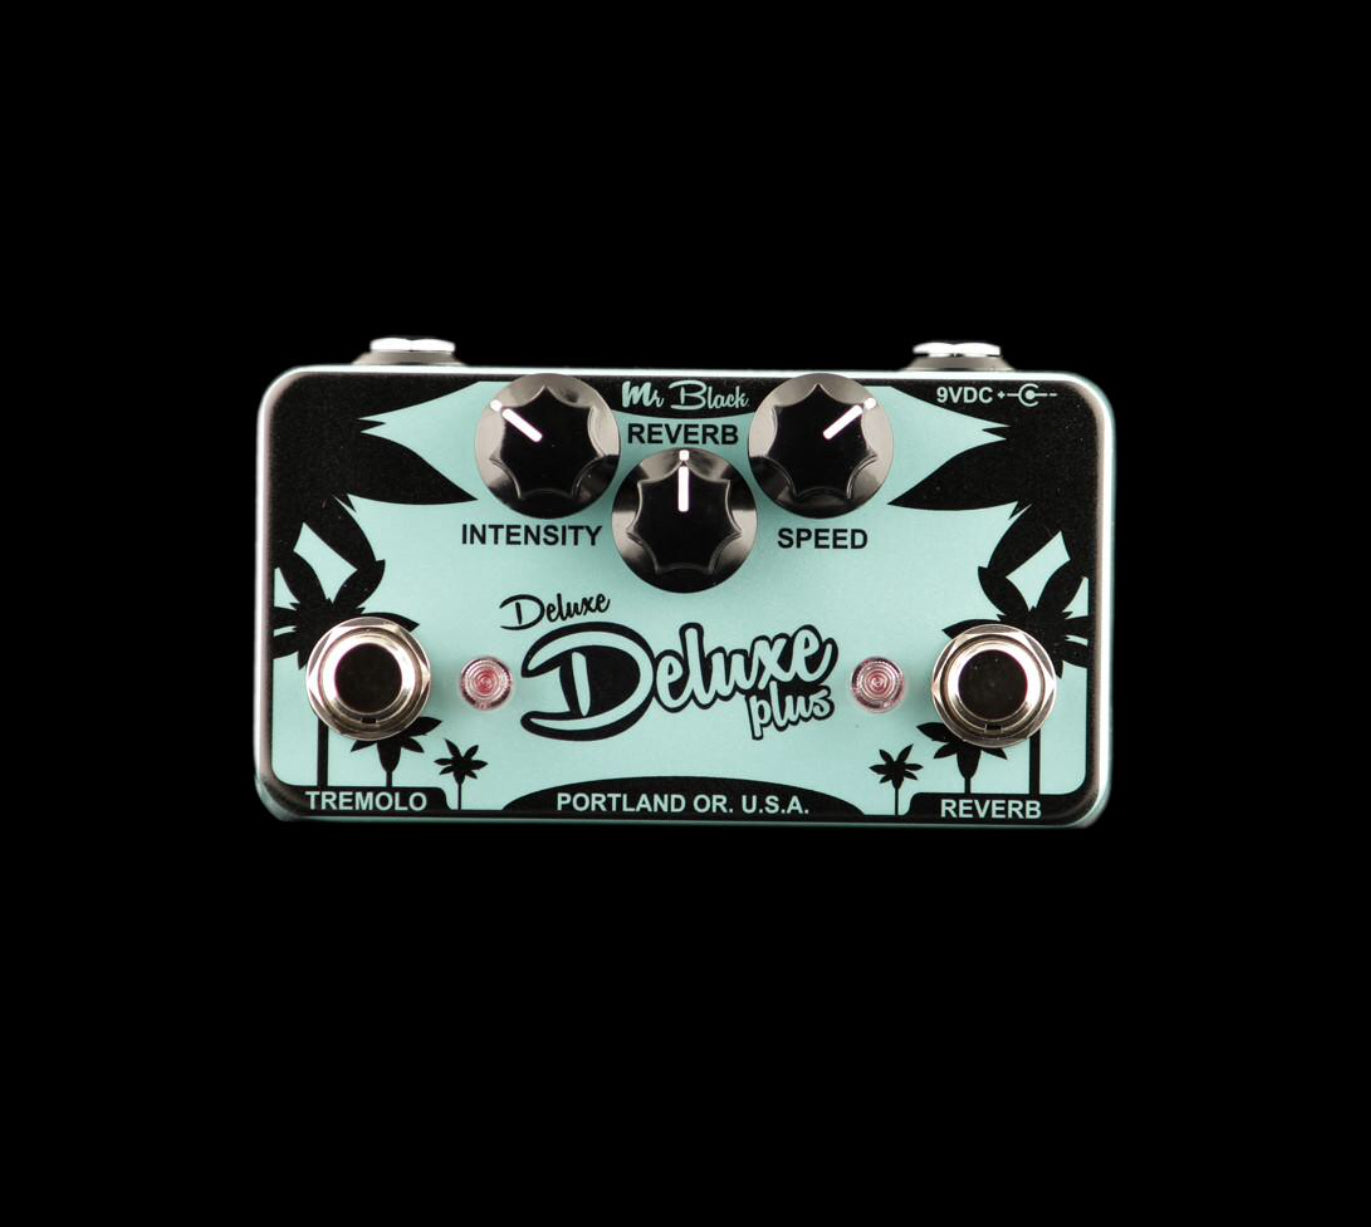 Mr Black Pedals Deluxe Deluxe Plus reverb and tremolo pedal.